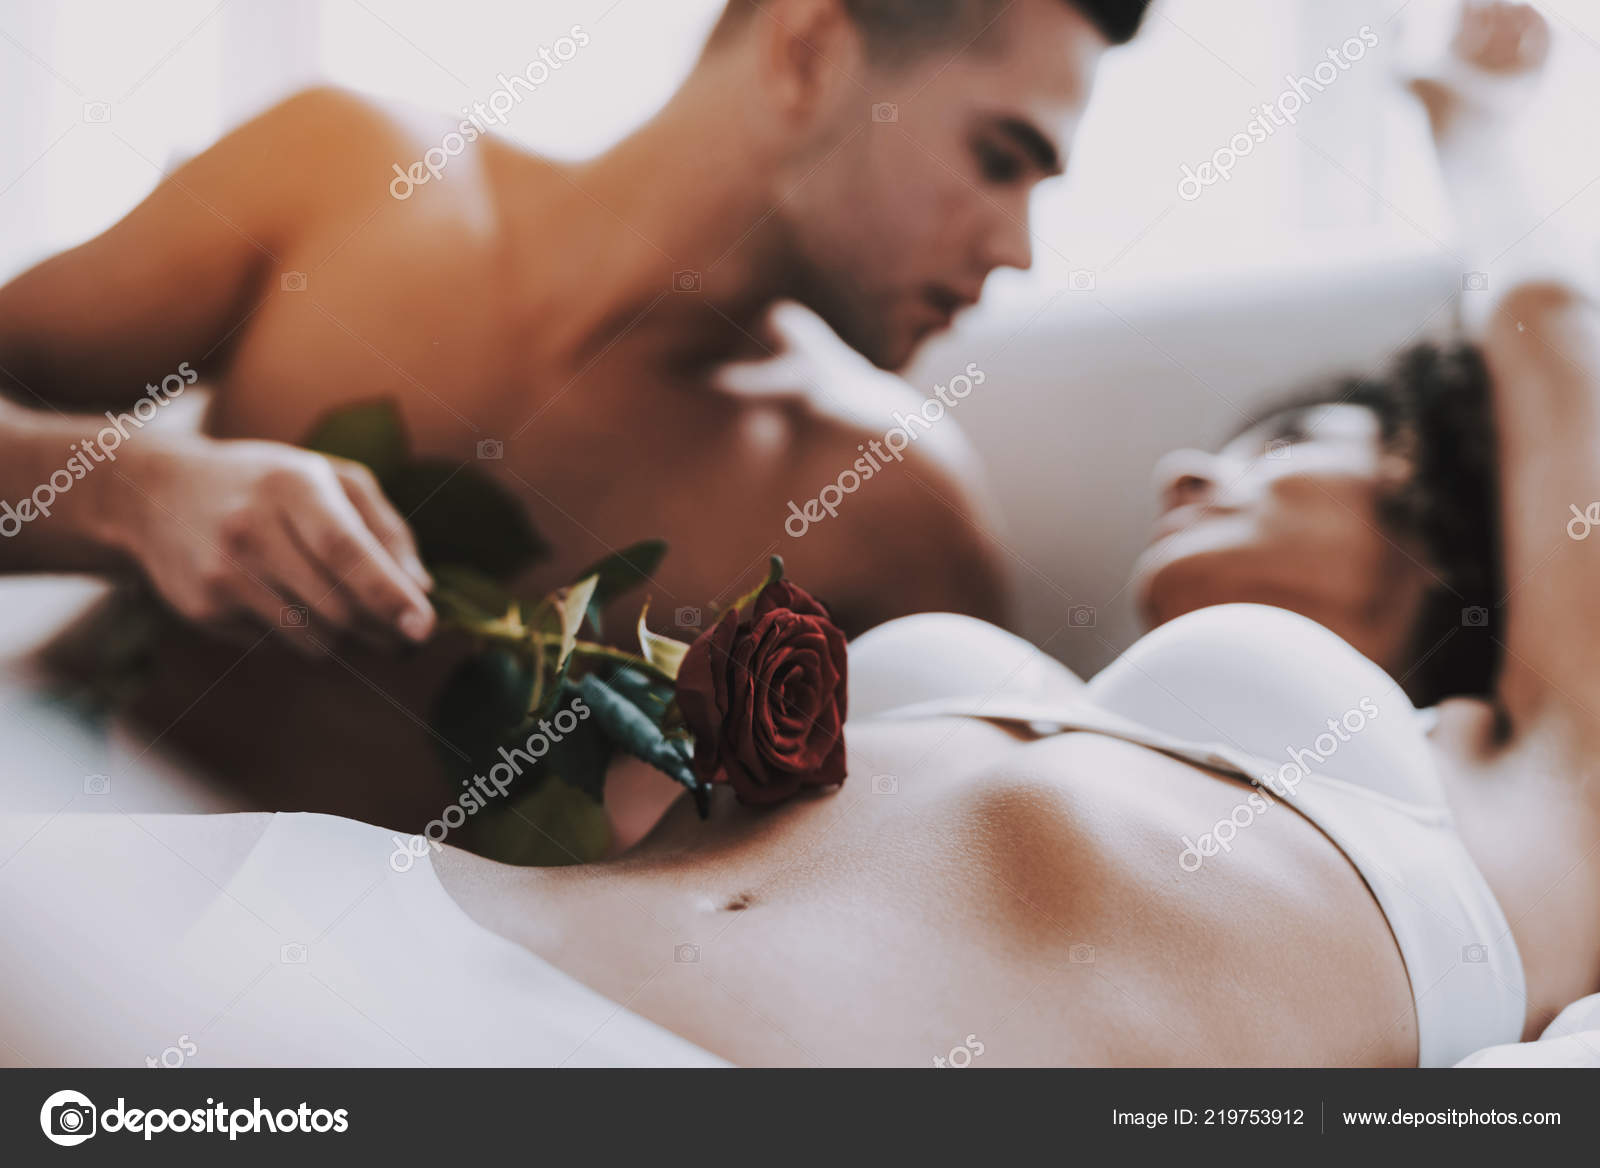 a man caresses his wife